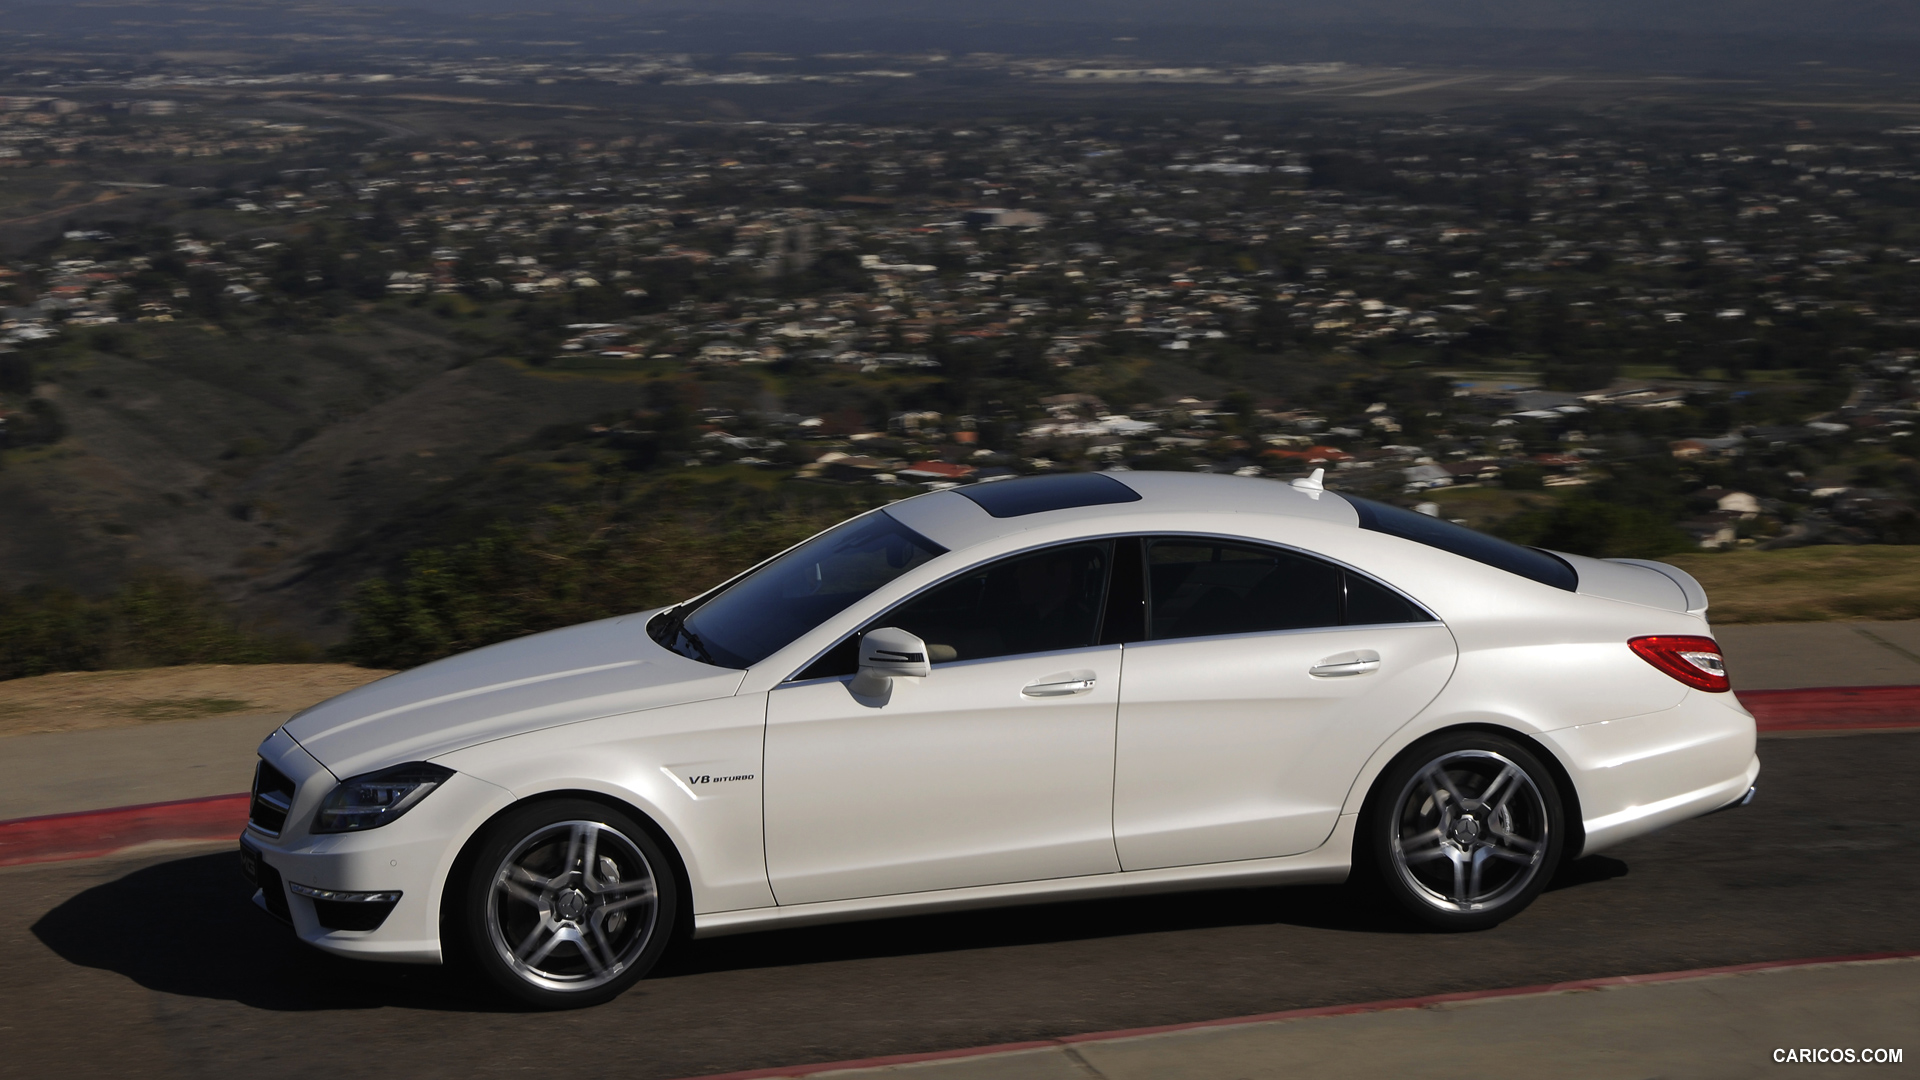 Mercedes-Benz CLS63 AMG (2012) US-Version - Diamond White - Side, #13 of 100